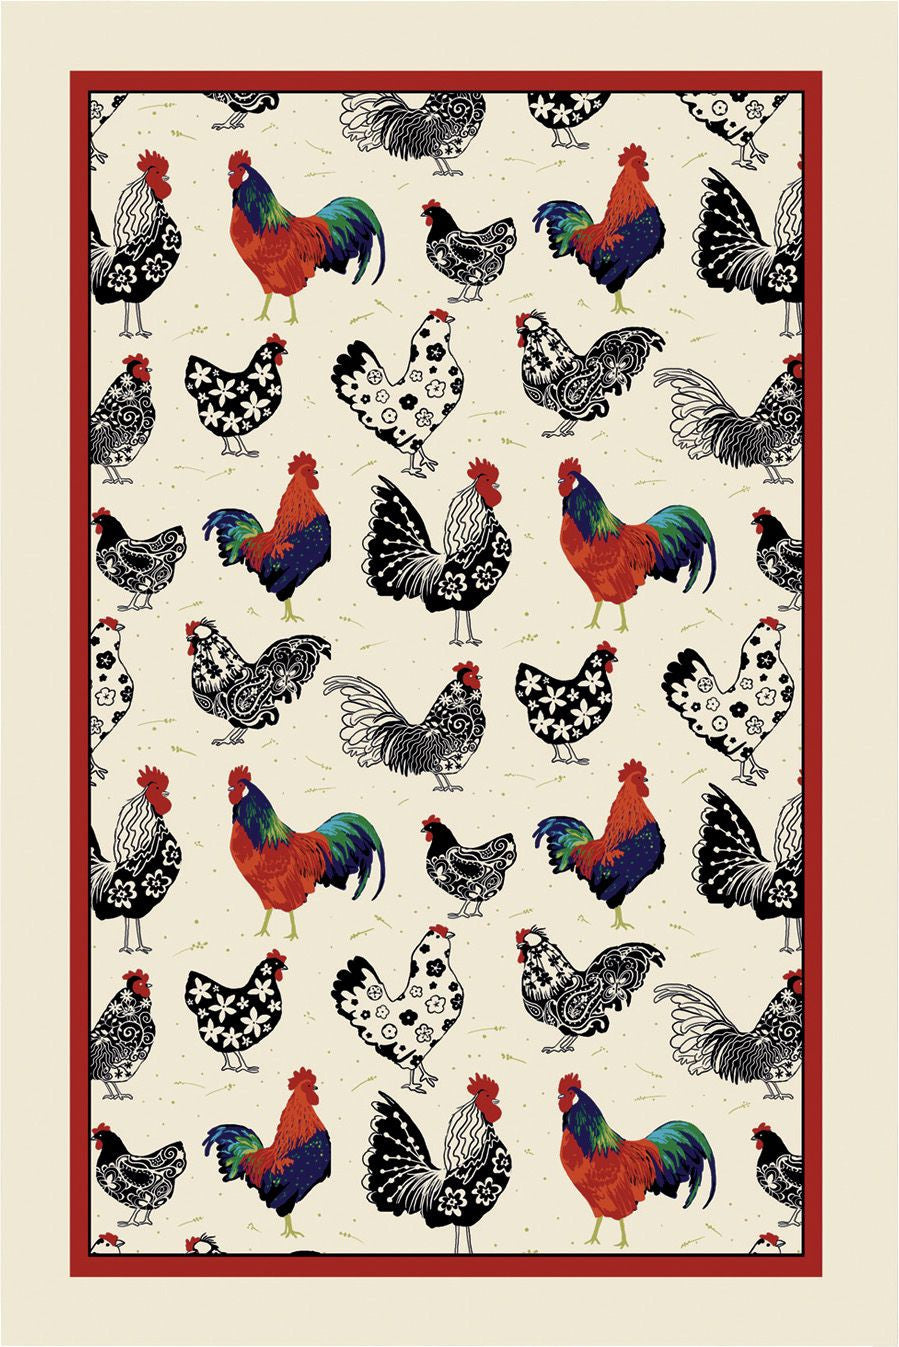 Ulster Weavers, “Rooster”, Pure cotton printed tea towel - Home Landing